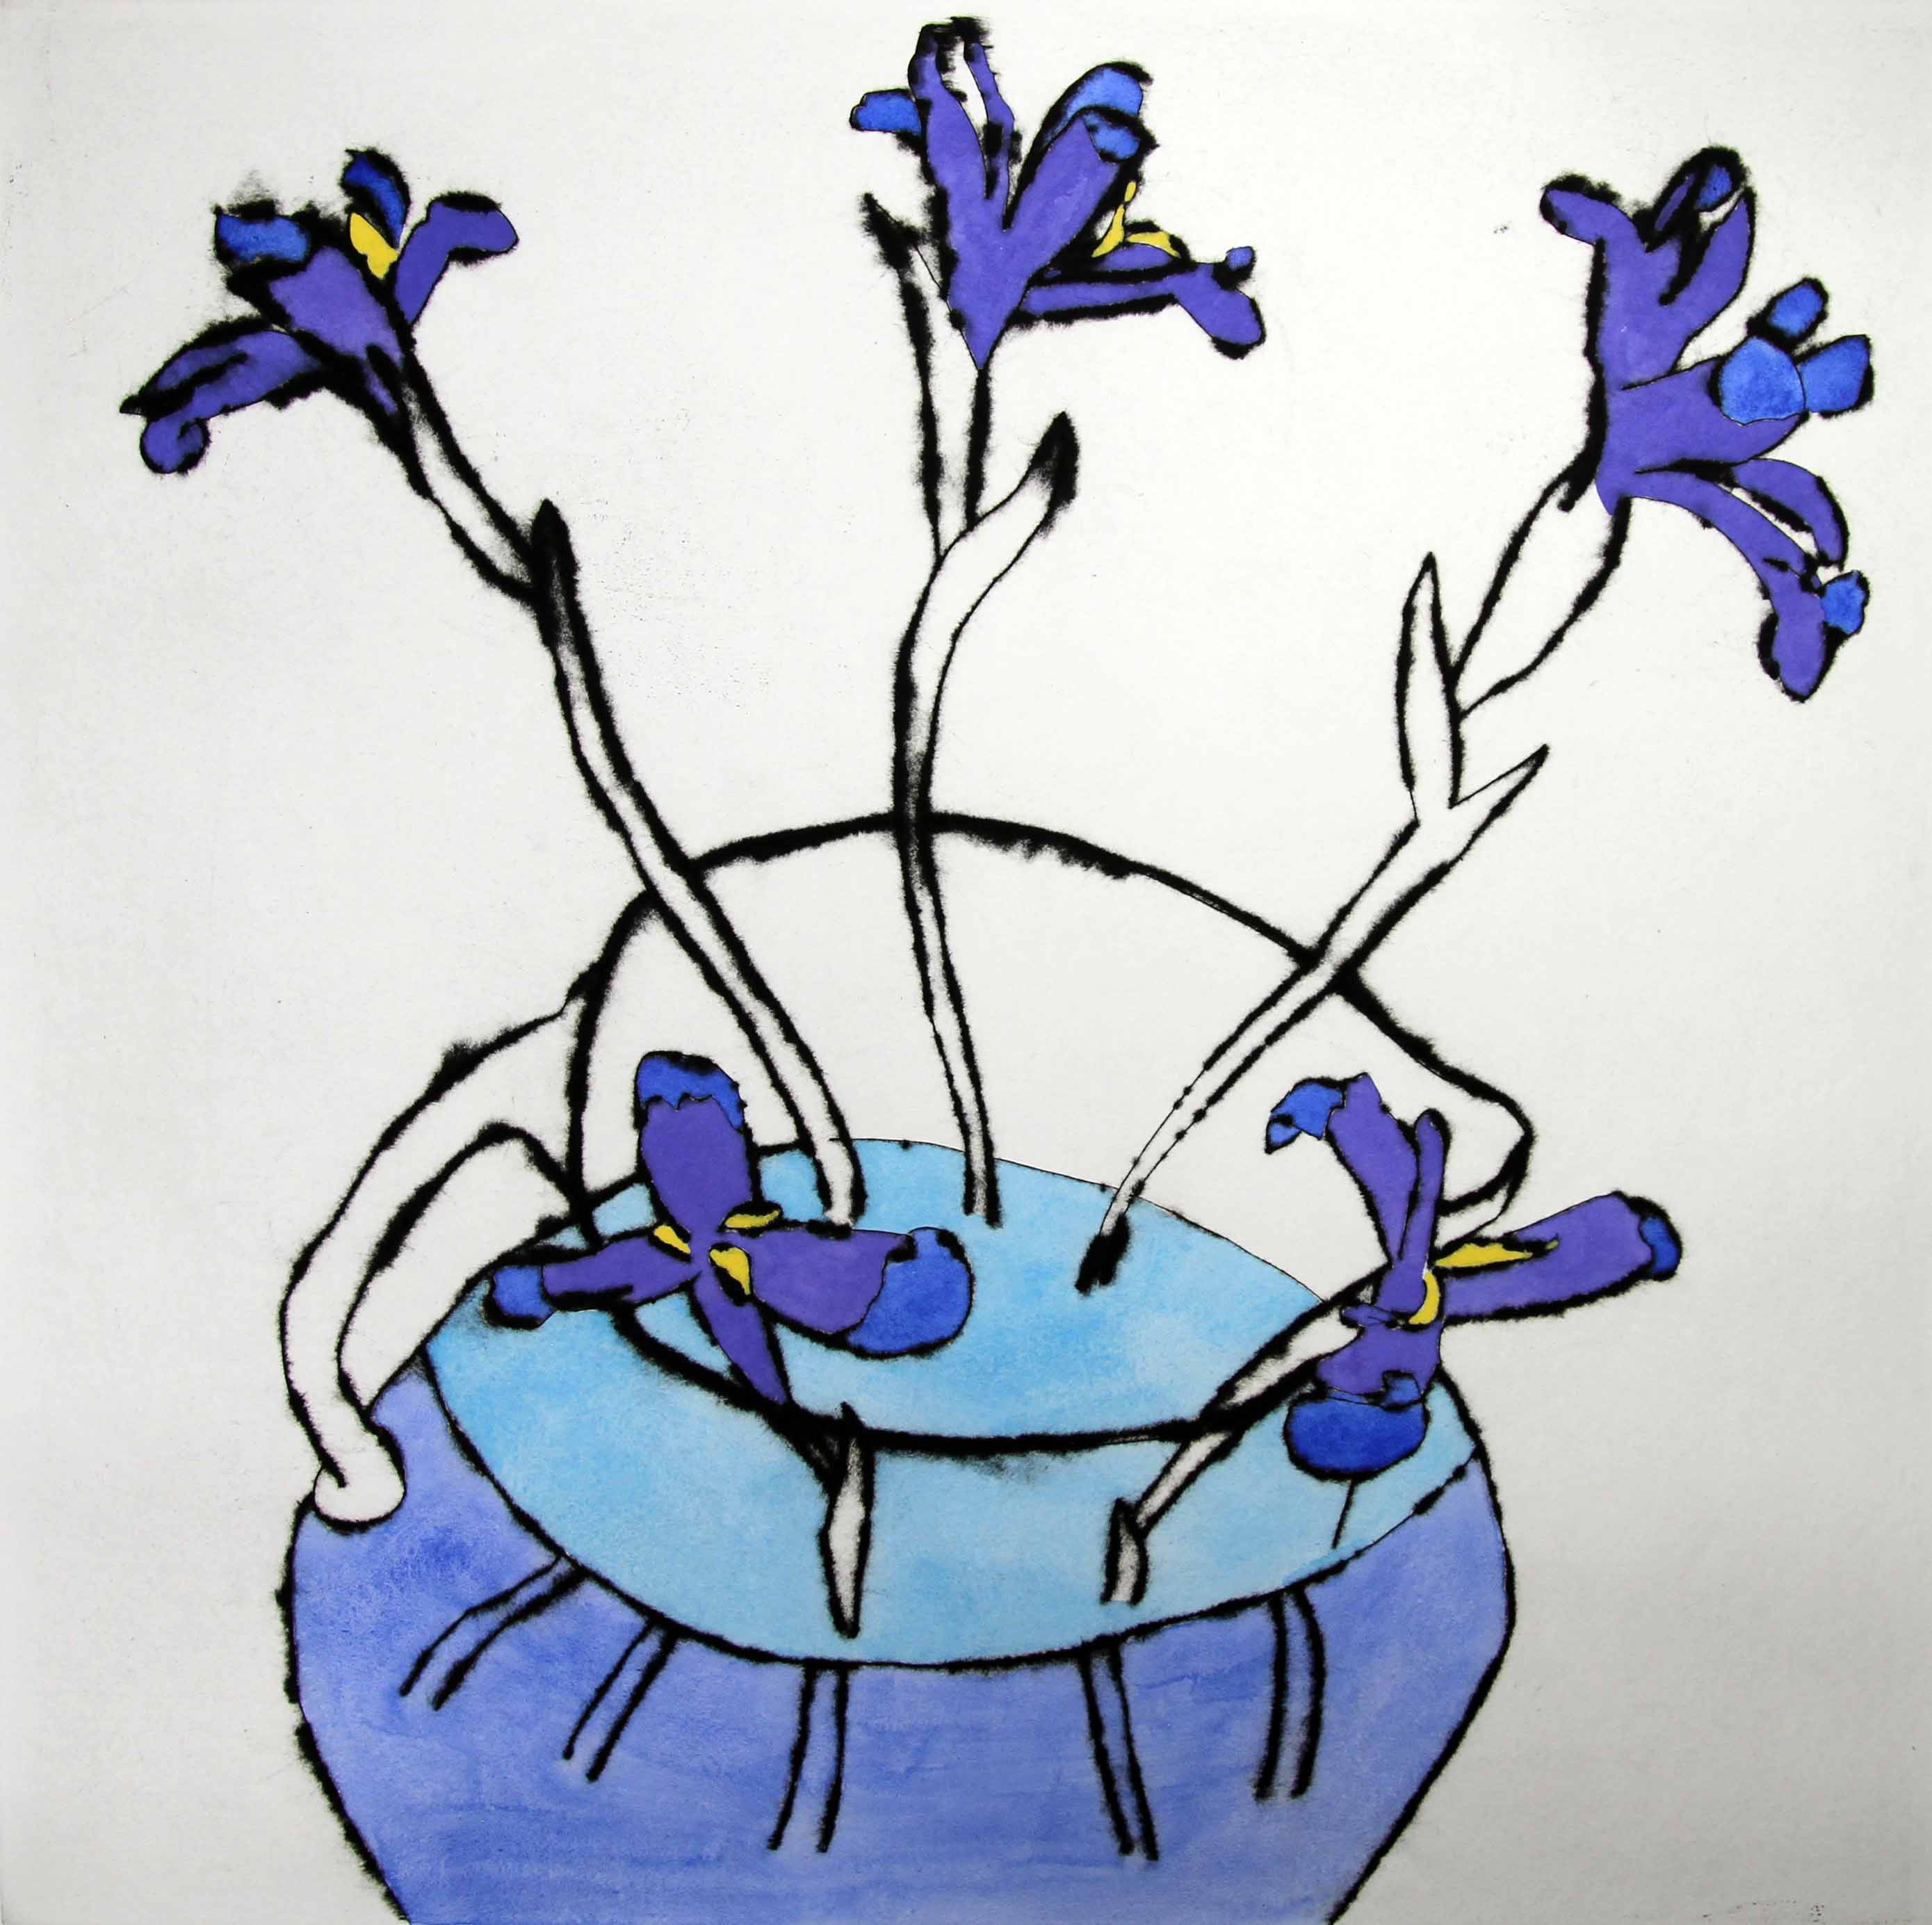 Five Irises - Limited Edition drypoint and watercolour fine art print by artist Richard Spare